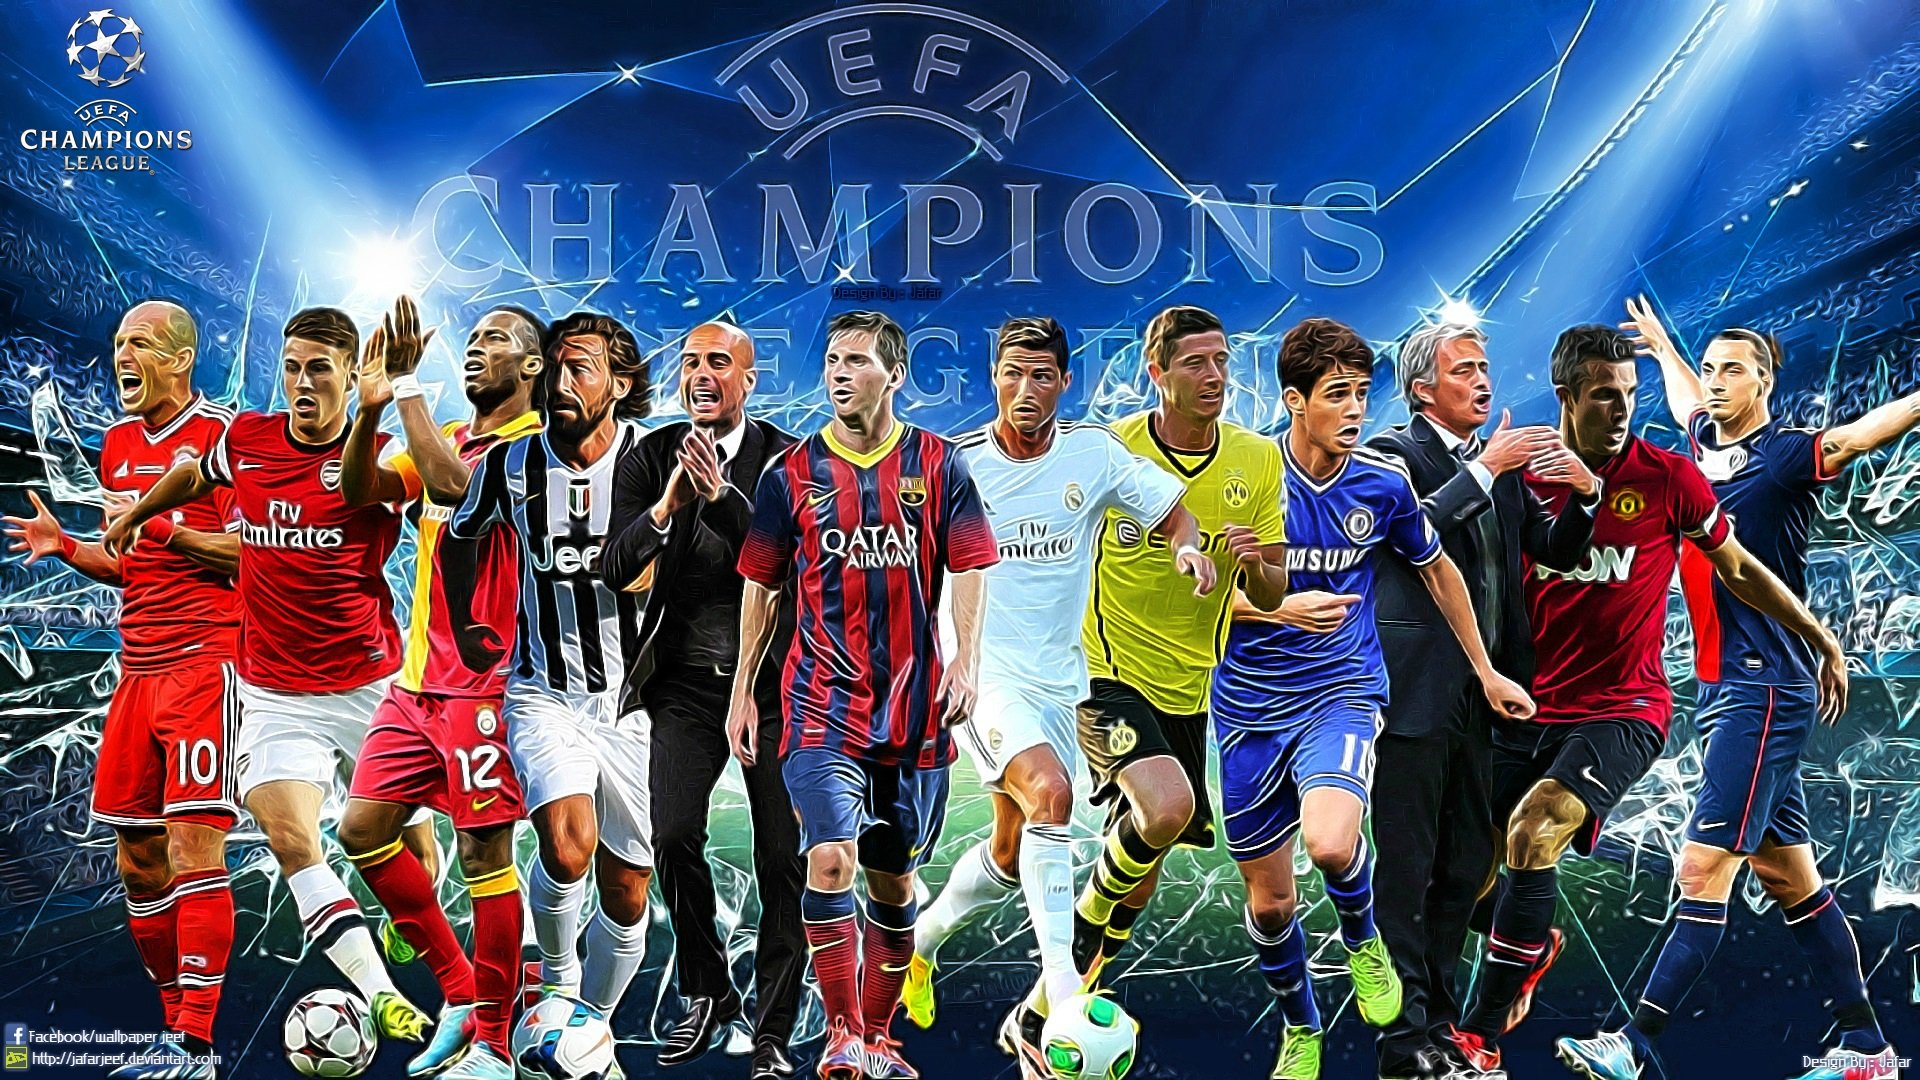 UEFA Champions League HD Wallpapers Backgrounds